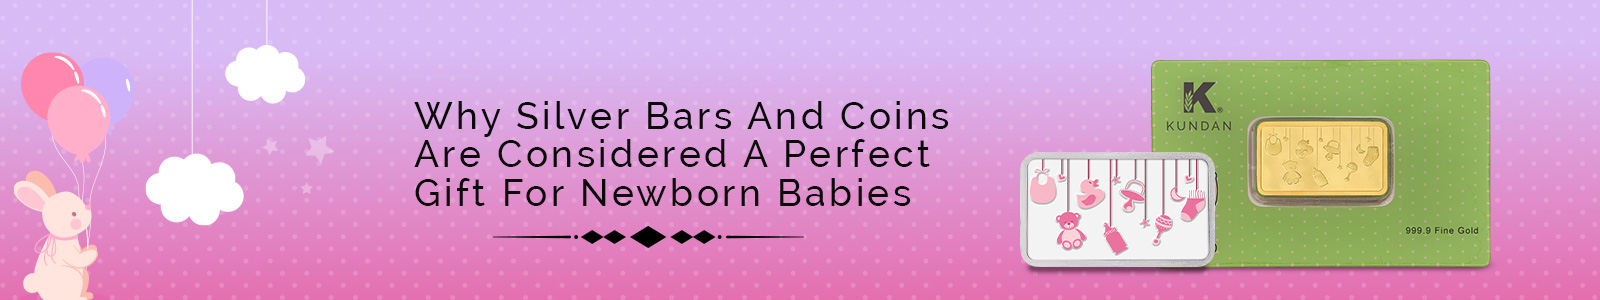 Why Silver Bars And Coins Are Considered A Perfect Gift For Newborn Babies